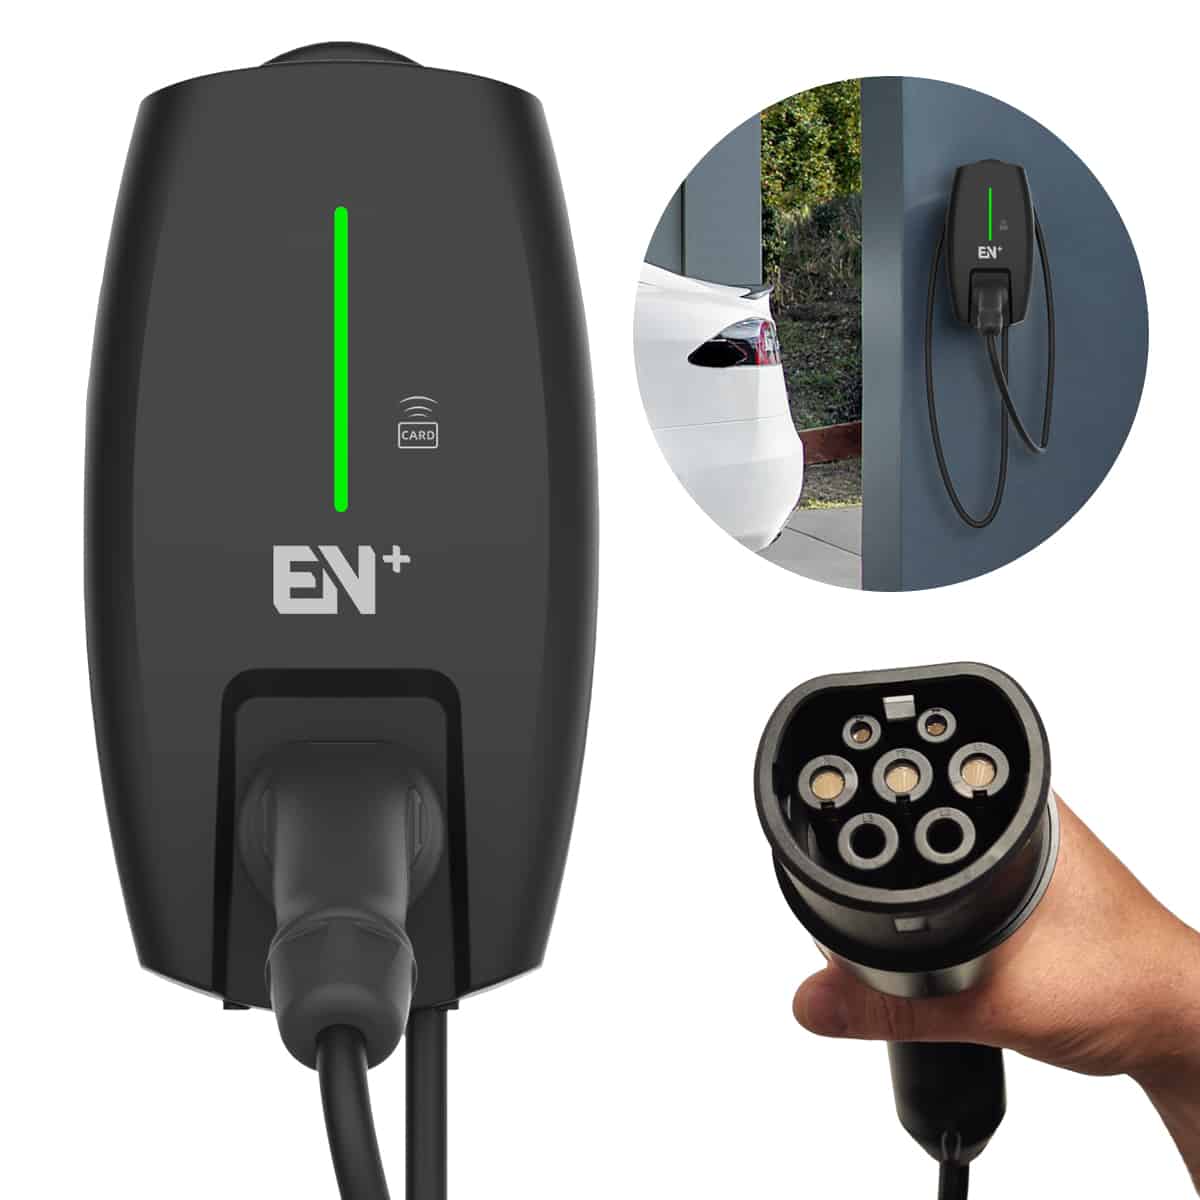 EN+ 7kW Smart Home EV Charge Point, 4m tethered